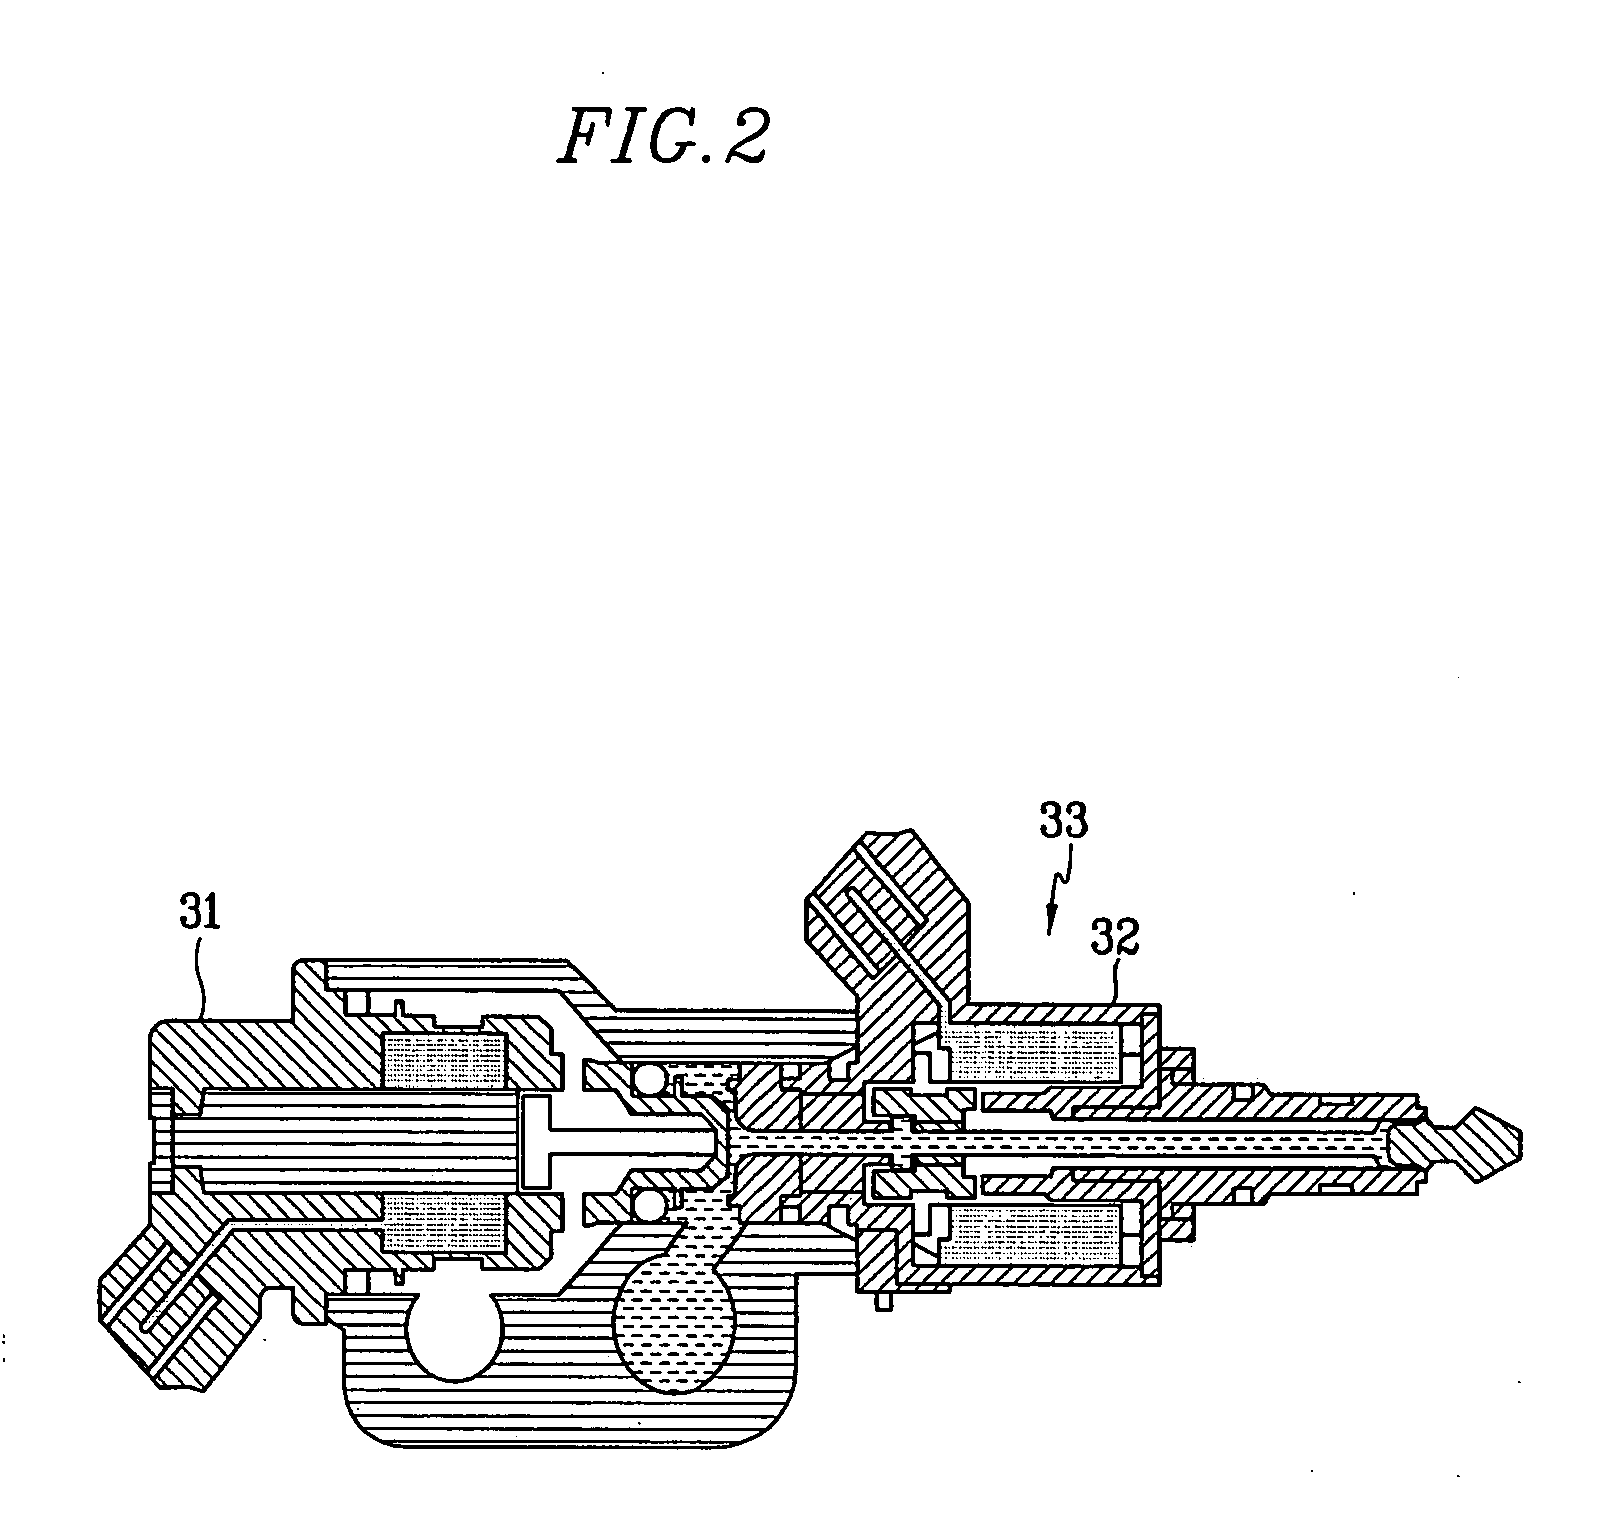 Gasoline direct injection system